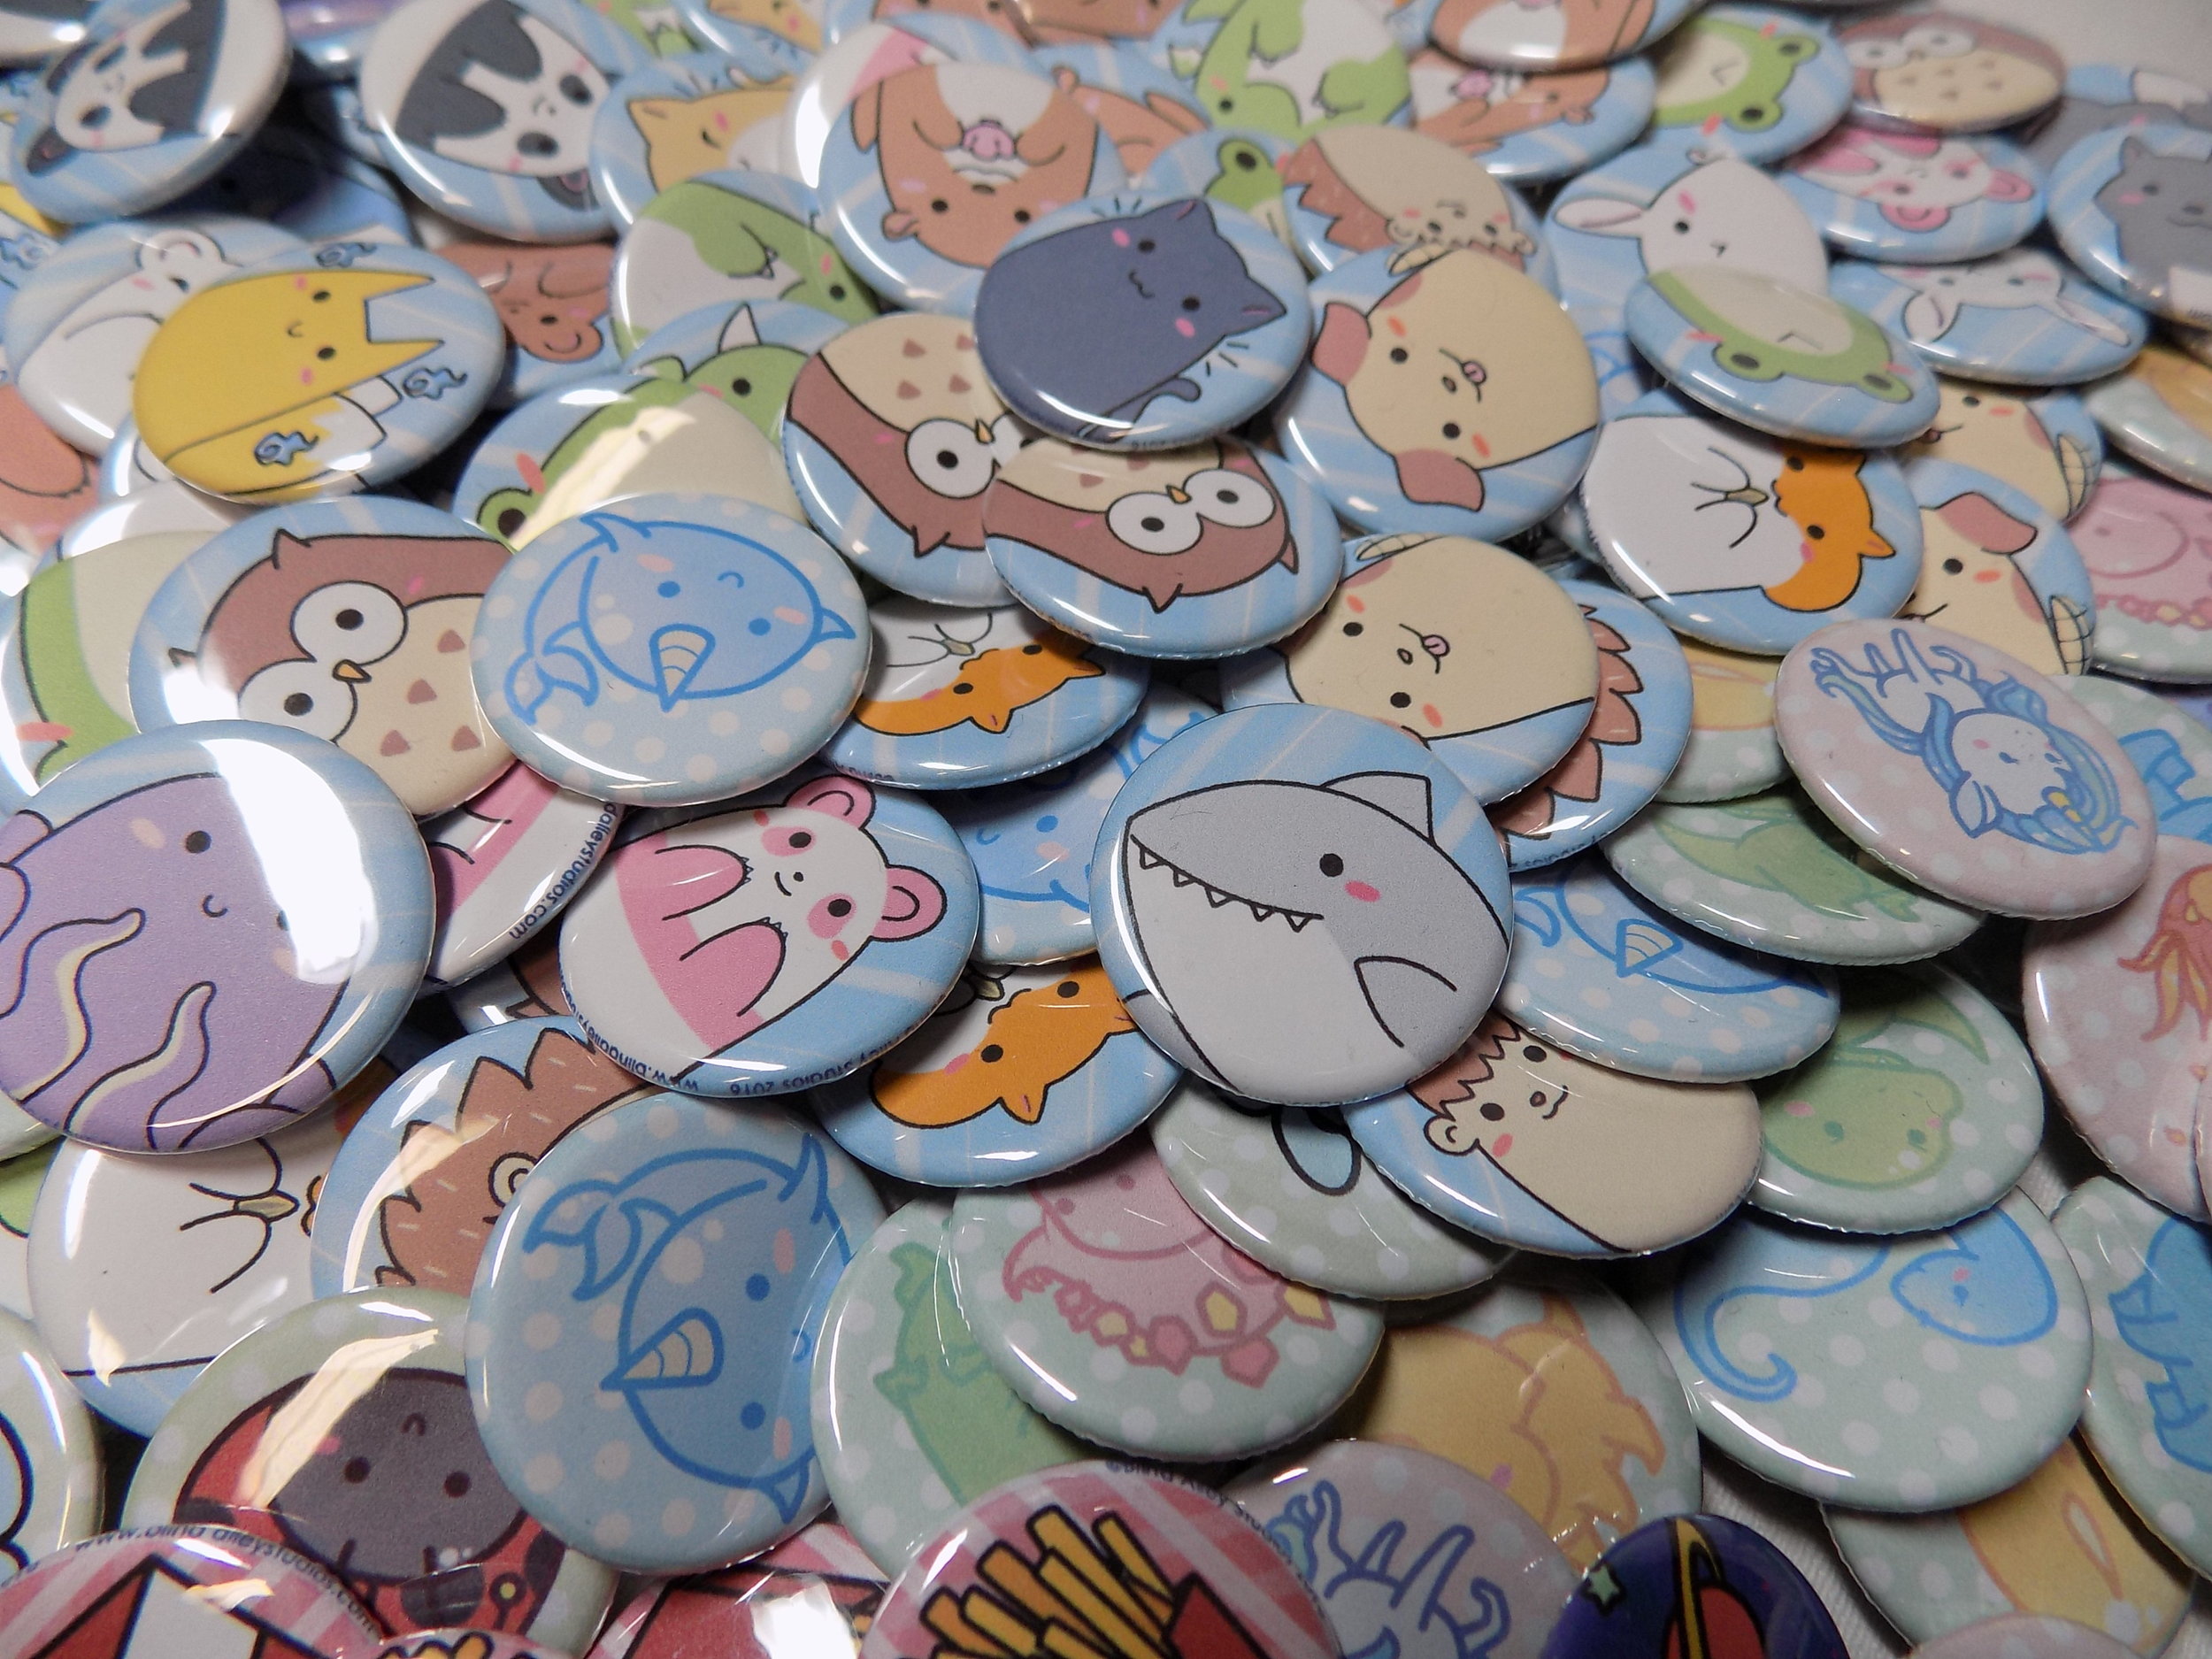 x5 Buttons Mystery Pokemon Pin Buttons 1.25 Mystery Buttons! 